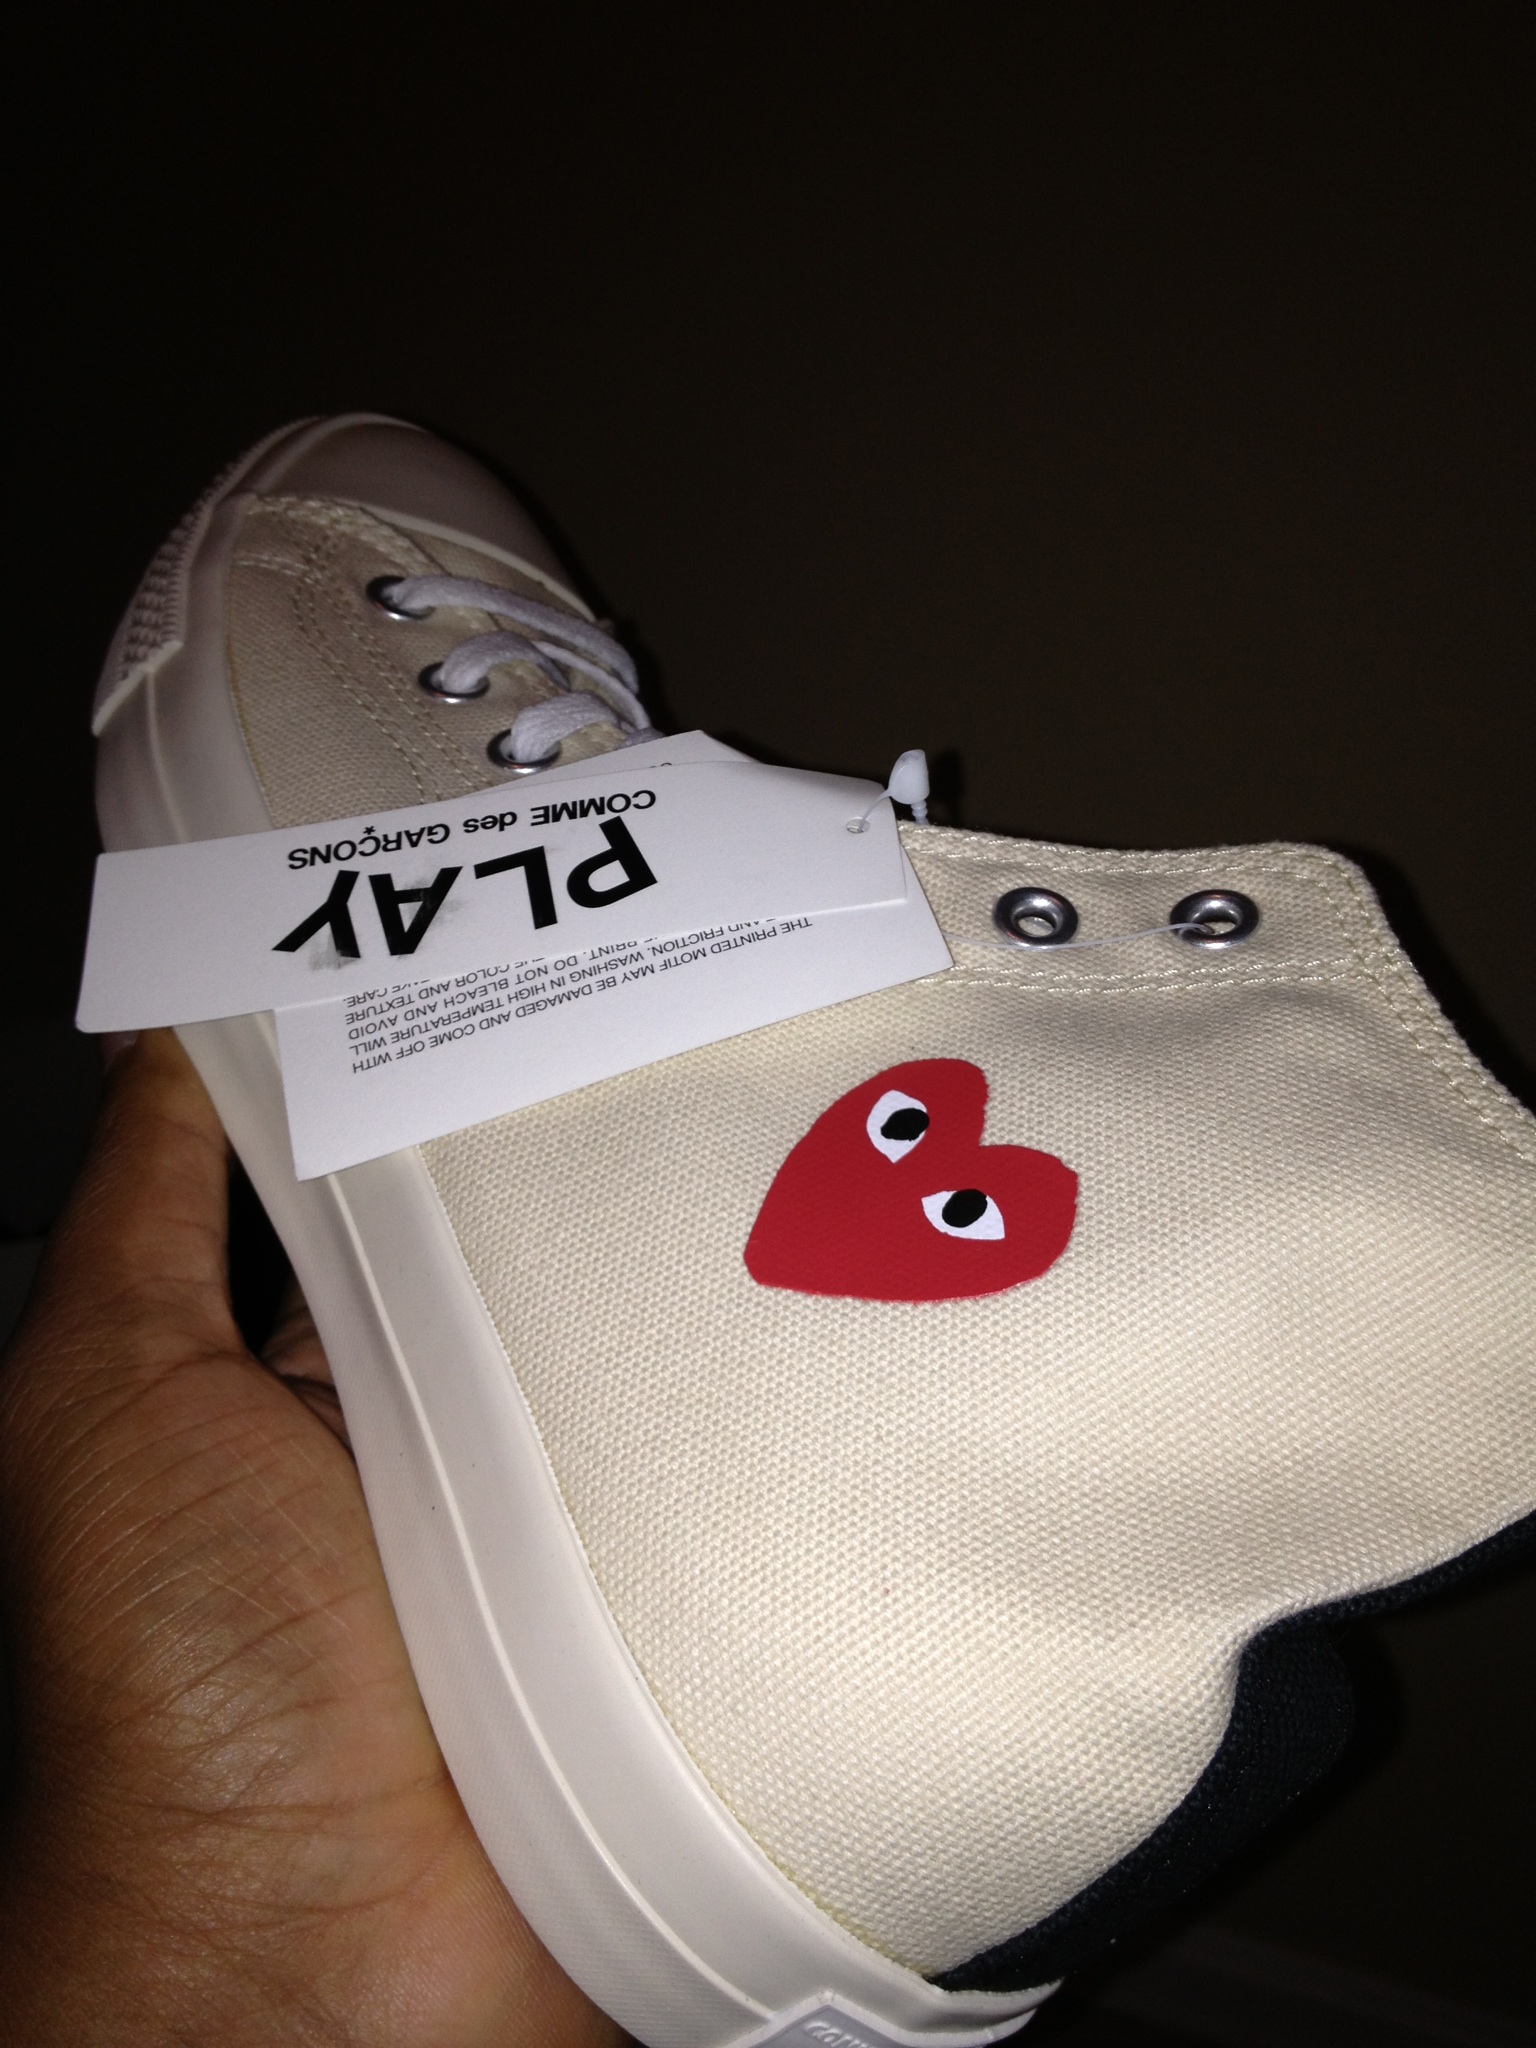 cdg converse review